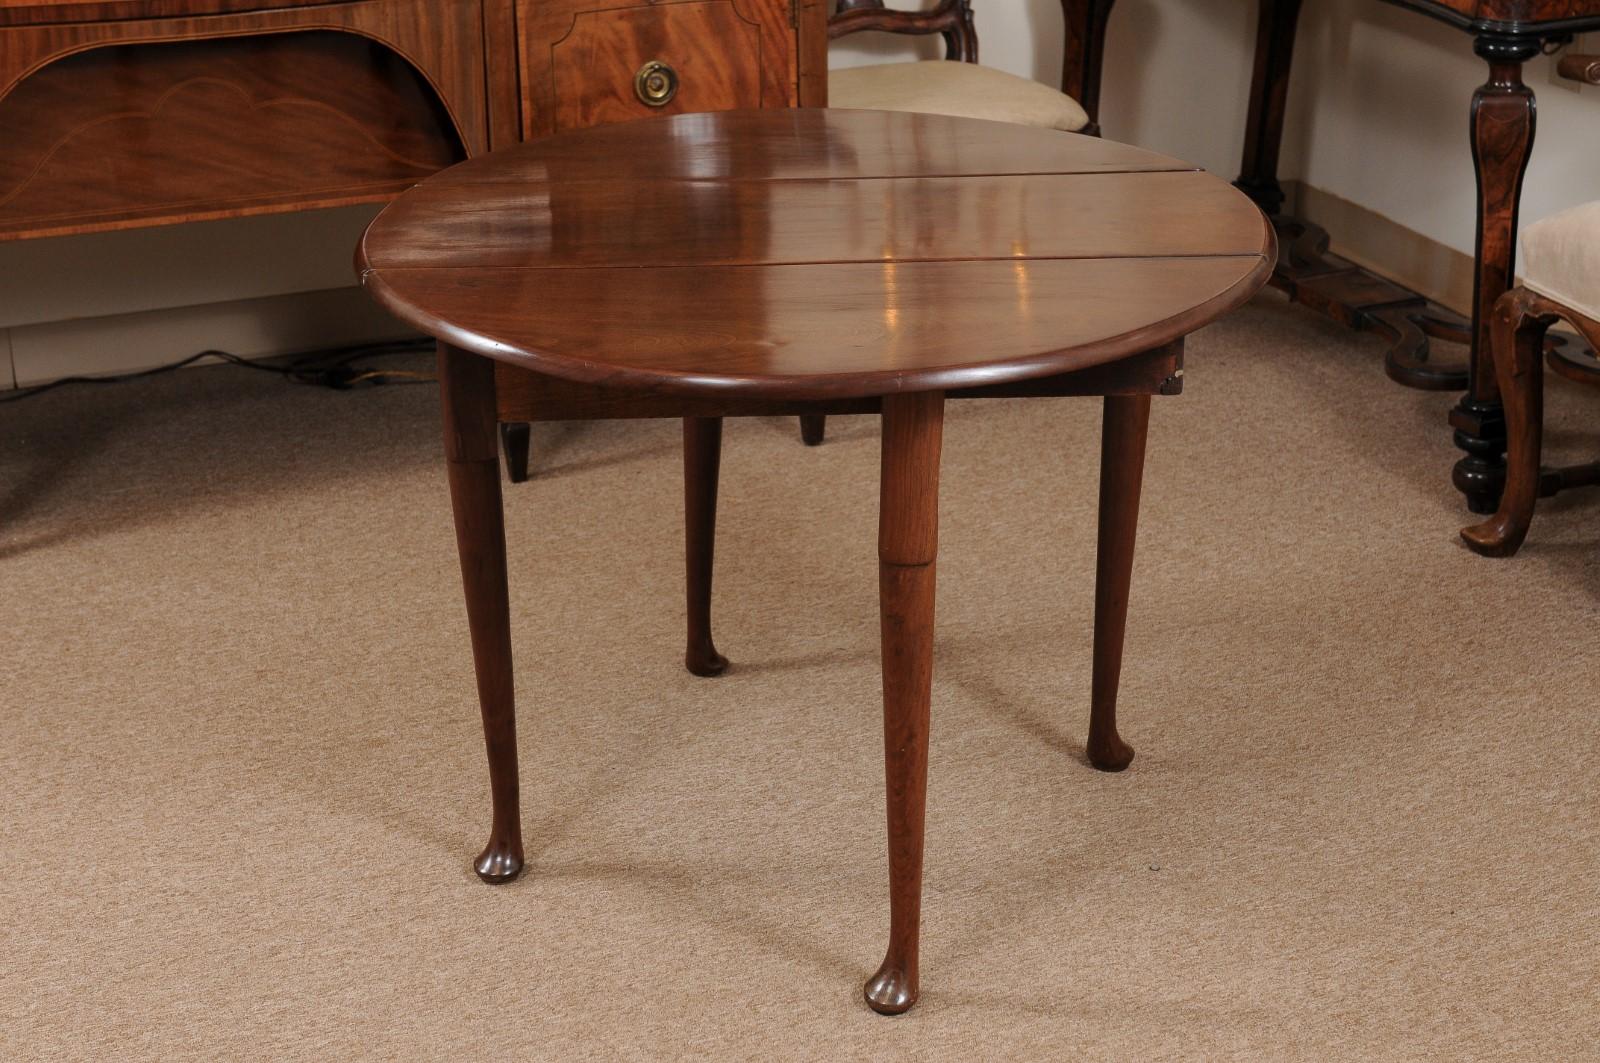 Queen Anne Drop Leaf Table in Walnut with Pad Feet In Good Condition For Sale In Atlanta, GA